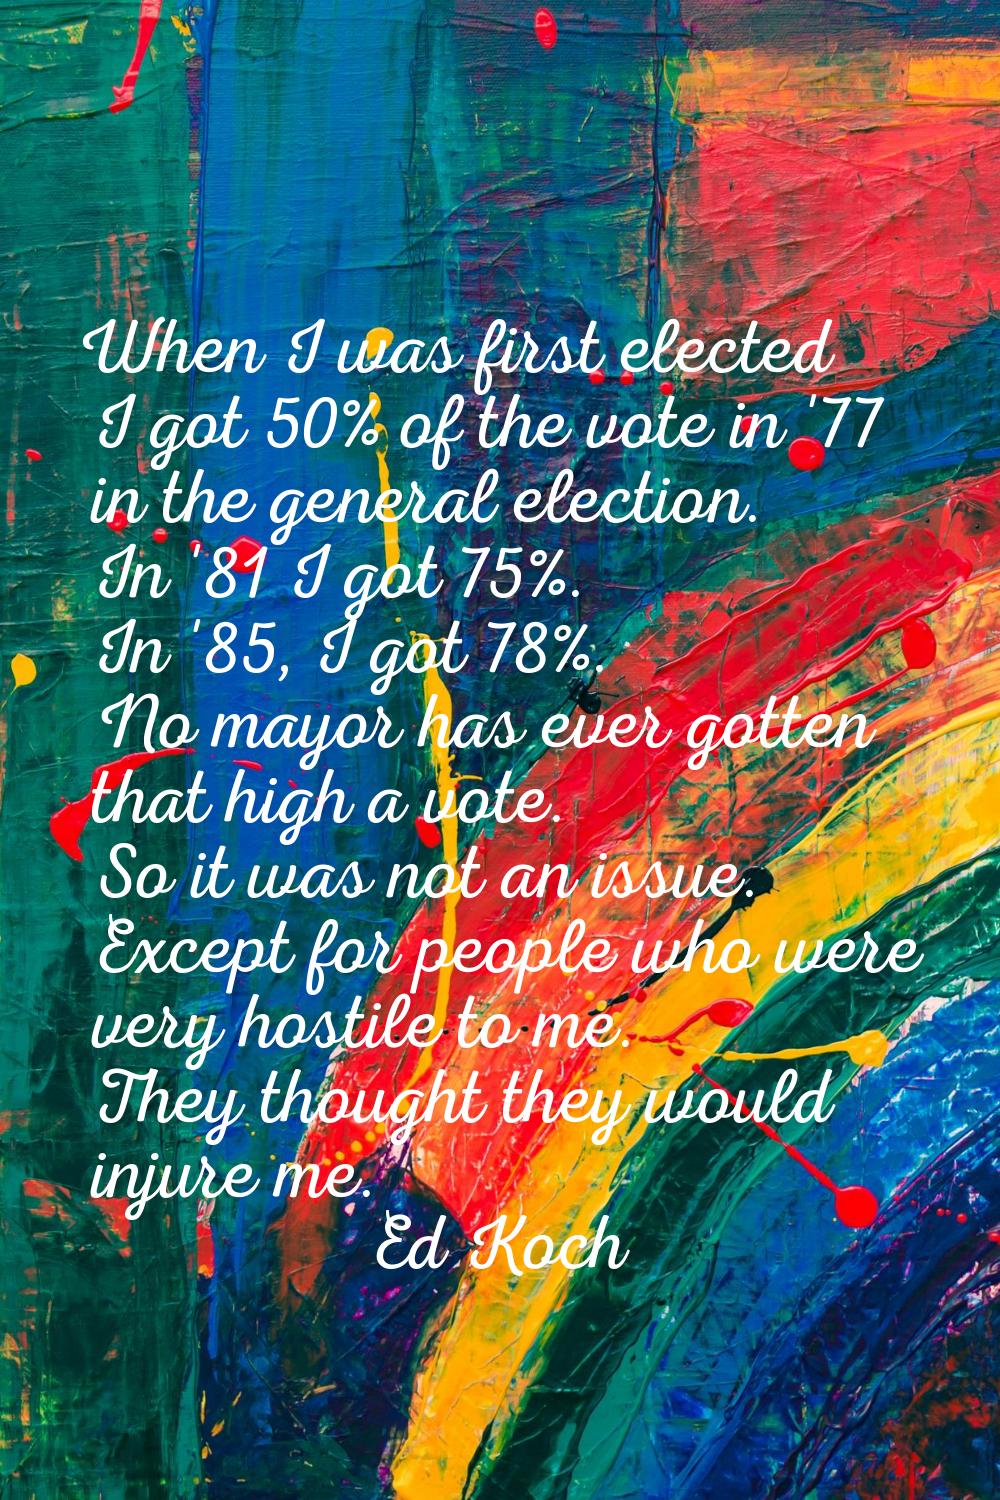 When I was first elected I got 50% of the vote in '77 in the general election. In '81 I got 75%. In